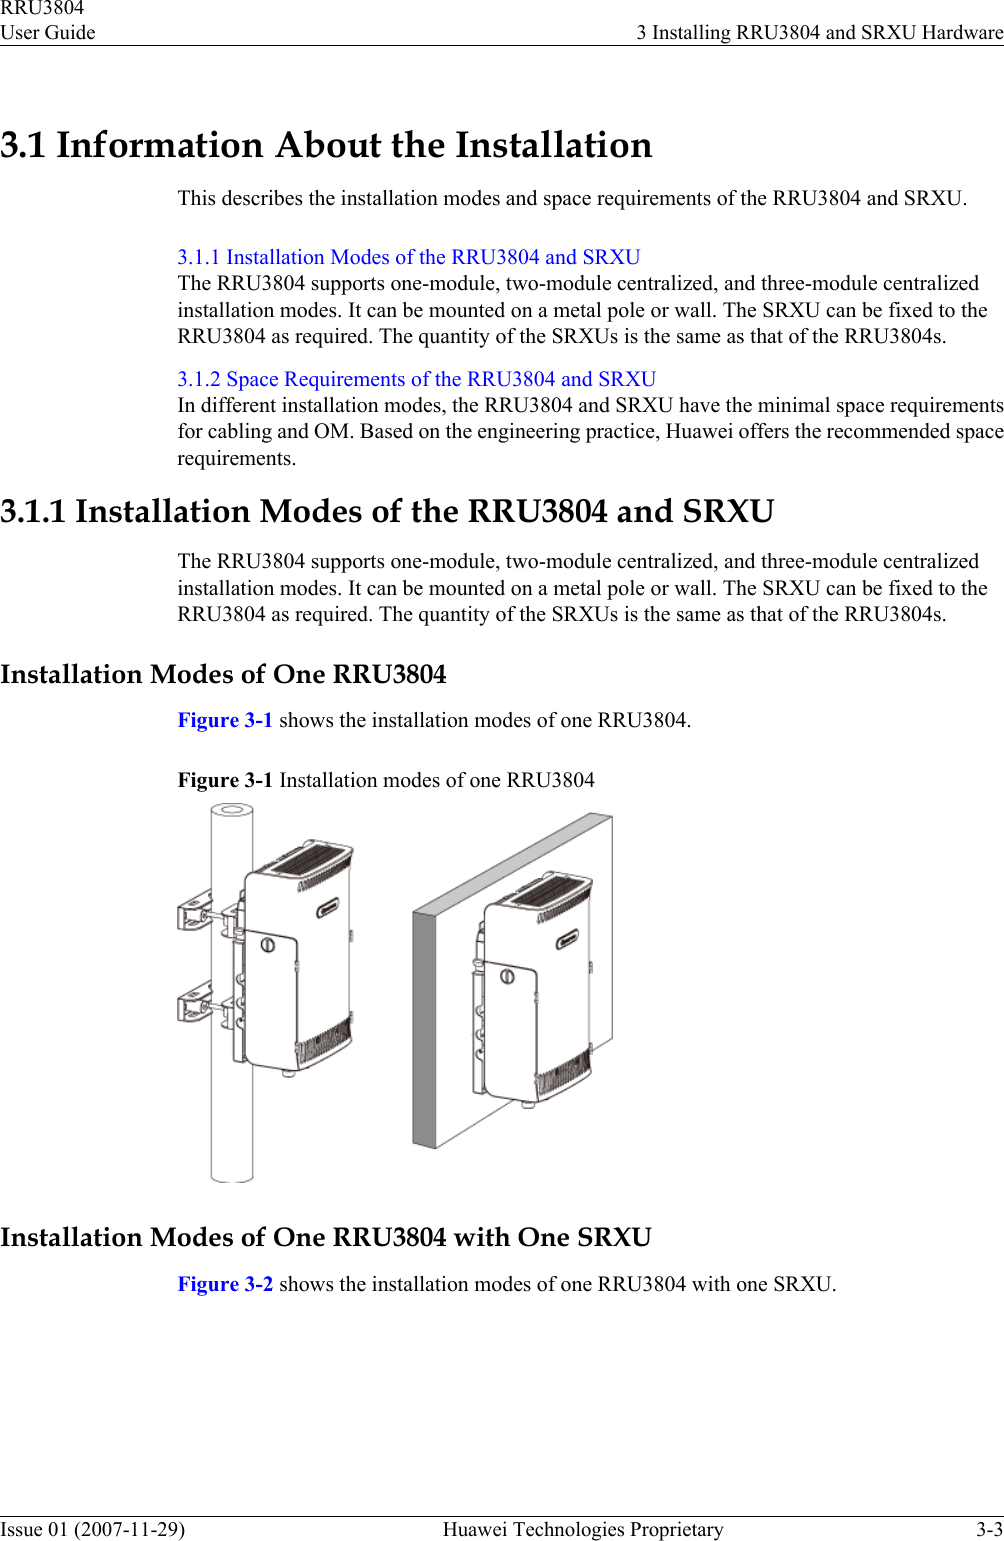 3.1 Information About the InstallationThis describes the installation modes and space requirements of the RRU3804 and SRXU.3.1.1 Installation Modes of the RRU3804 and SRXUThe RRU3804 supports one-module, two-module centralized, and three-module centralizedinstallation modes. It can be mounted on a metal pole or wall. The SRXU can be fixed to theRRU3804 as required. The quantity of the SRXUs is the same as that of the RRU3804s.3.1.2 Space Requirements of the RRU3804 and SRXUIn different installation modes, the RRU3804 and SRXU have the minimal space requirementsfor cabling and OM. Based on the engineering practice, Huawei offers the recommended spacerequirements.3.1.1 Installation Modes of the RRU3804 and SRXUThe RRU3804 supports one-module, two-module centralized, and three-module centralizedinstallation modes. It can be mounted on a metal pole or wall. The SRXU can be fixed to theRRU3804 as required. The quantity of the SRXUs is the same as that of the RRU3804s.Installation Modes of One RRU3804Figure 3-1 shows the installation modes of one RRU3804.Figure 3-1 Installation modes of one RRU3804Installation Modes of One RRU3804 with One SRXUFigure 3-2 shows the installation modes of one RRU3804 with one SRXU.RRU3804User Guide 3 Installing RRU3804 and SRXU HardwareIssue 01 (2007-11-29)  Huawei Technologies Proprietary 3-3